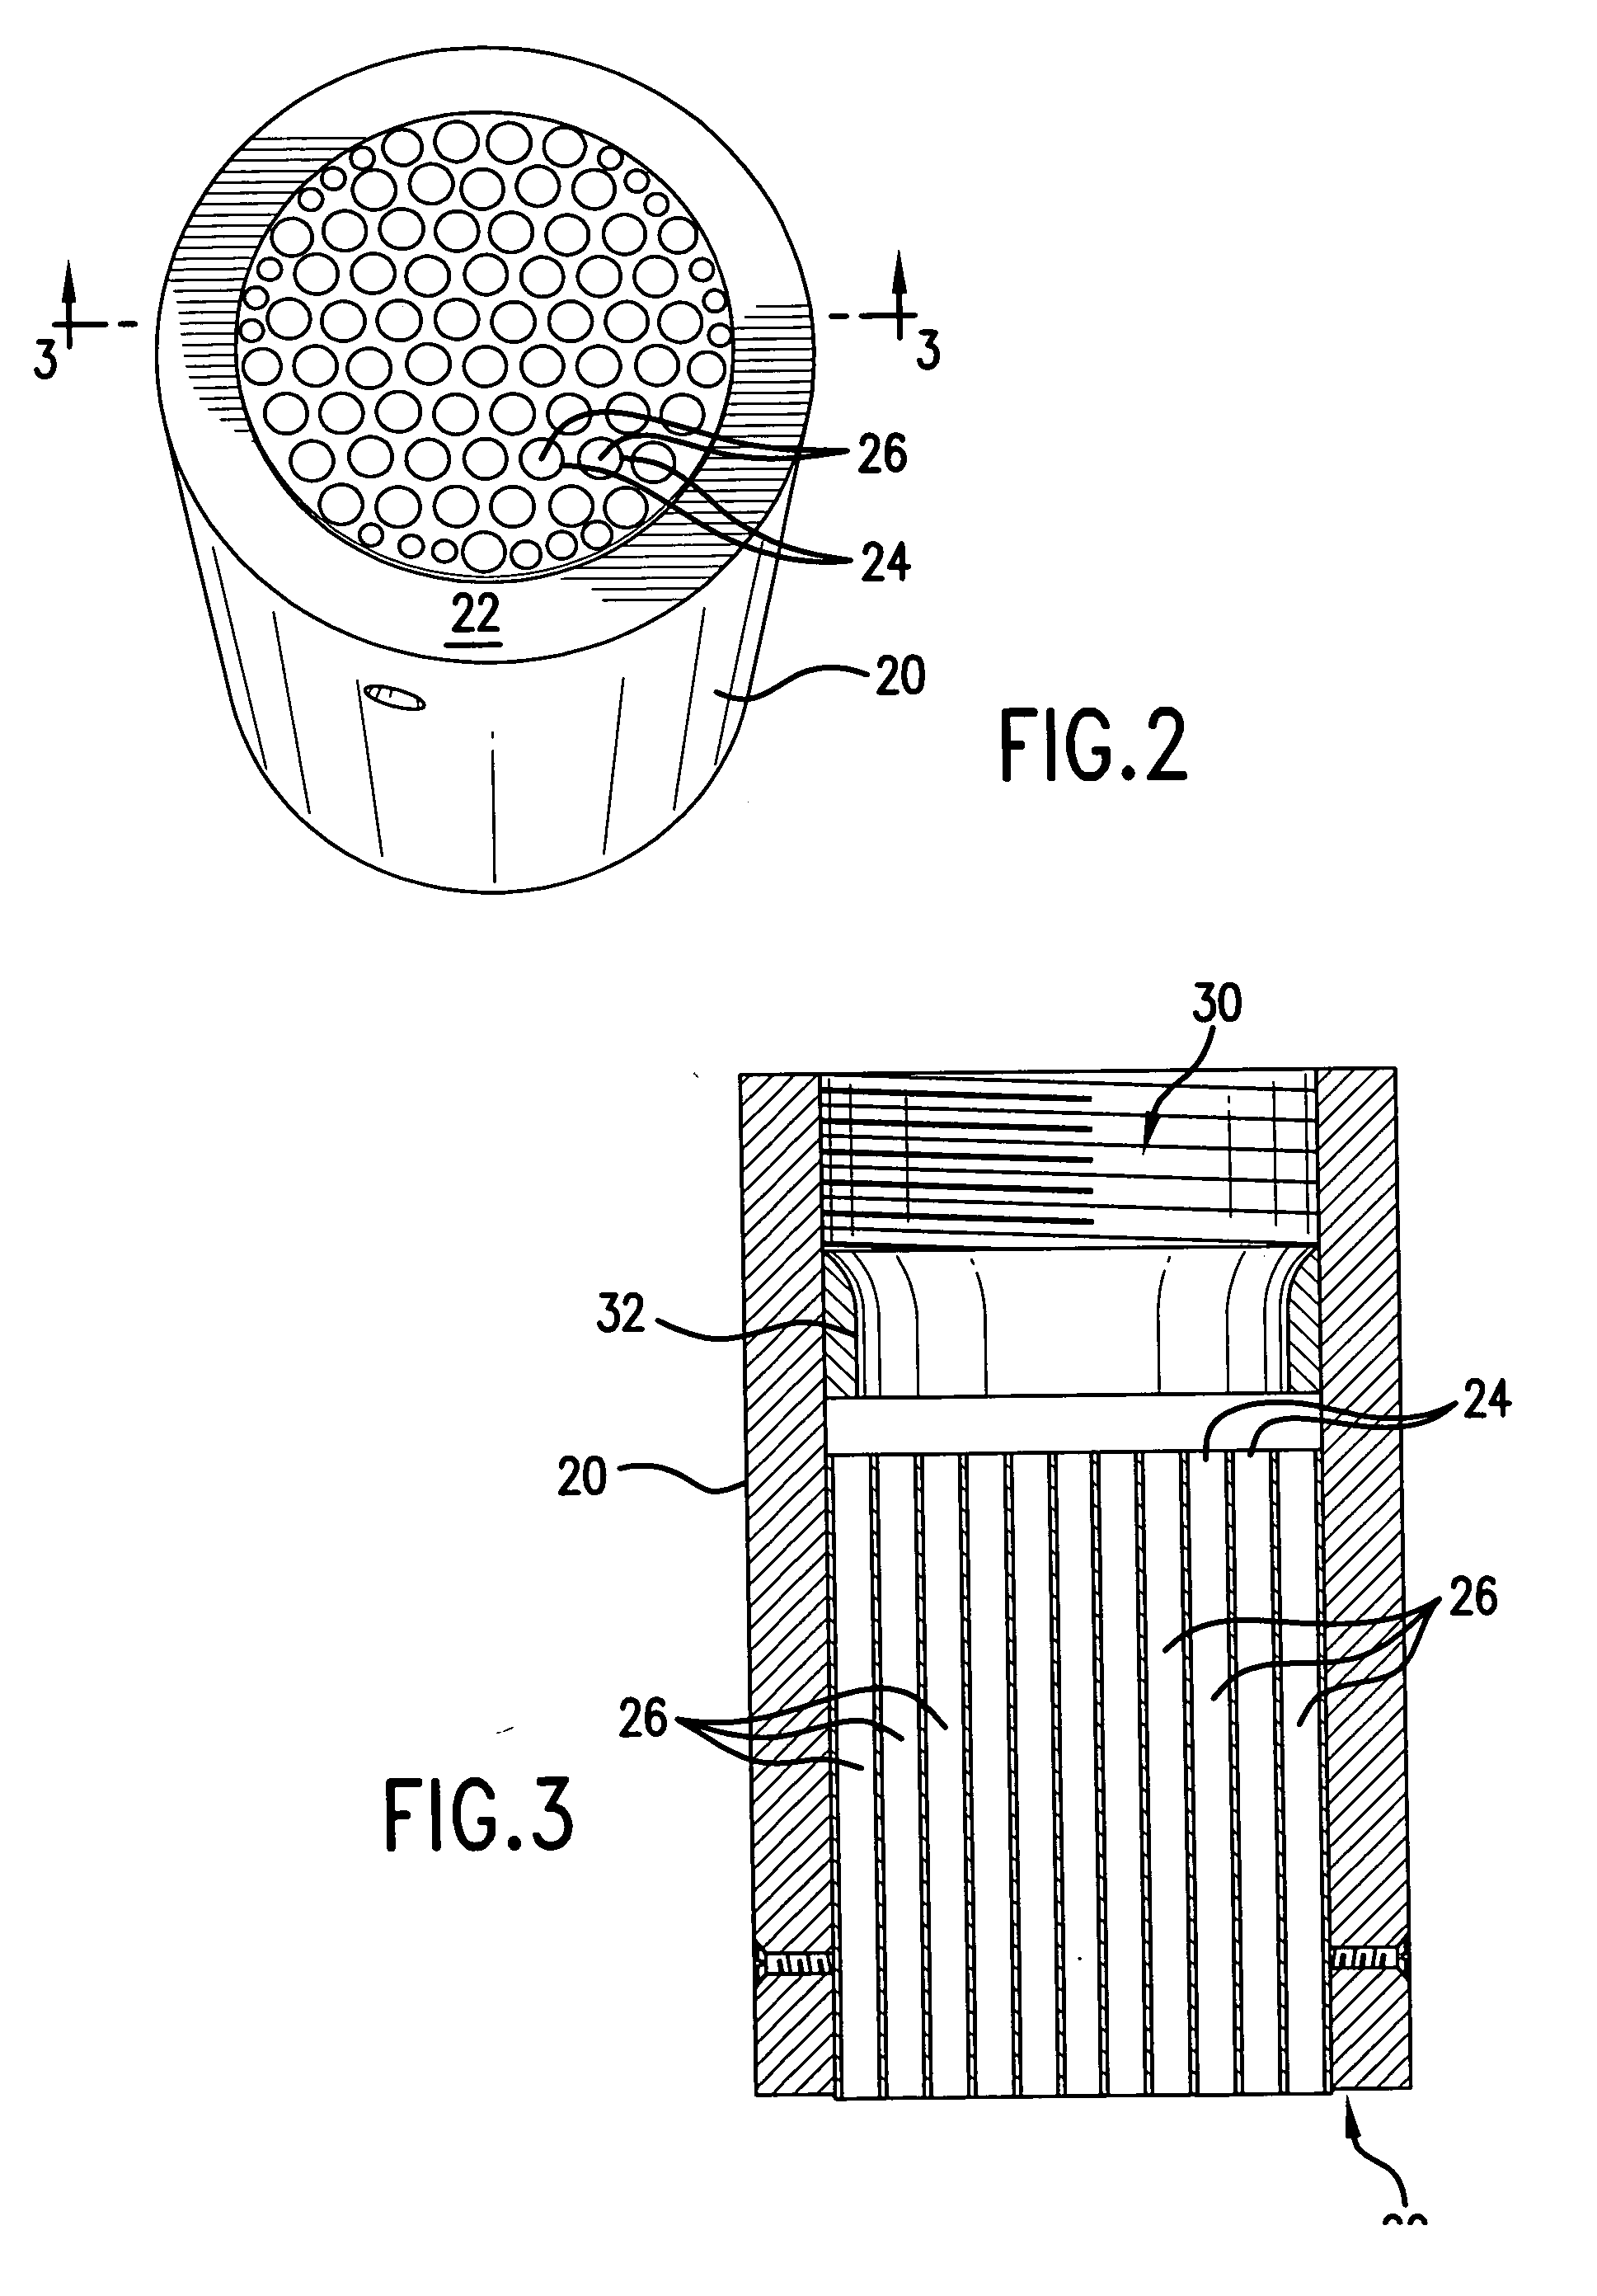 Apparatus and process to enhance the uniform formation of hollow glass microspheres